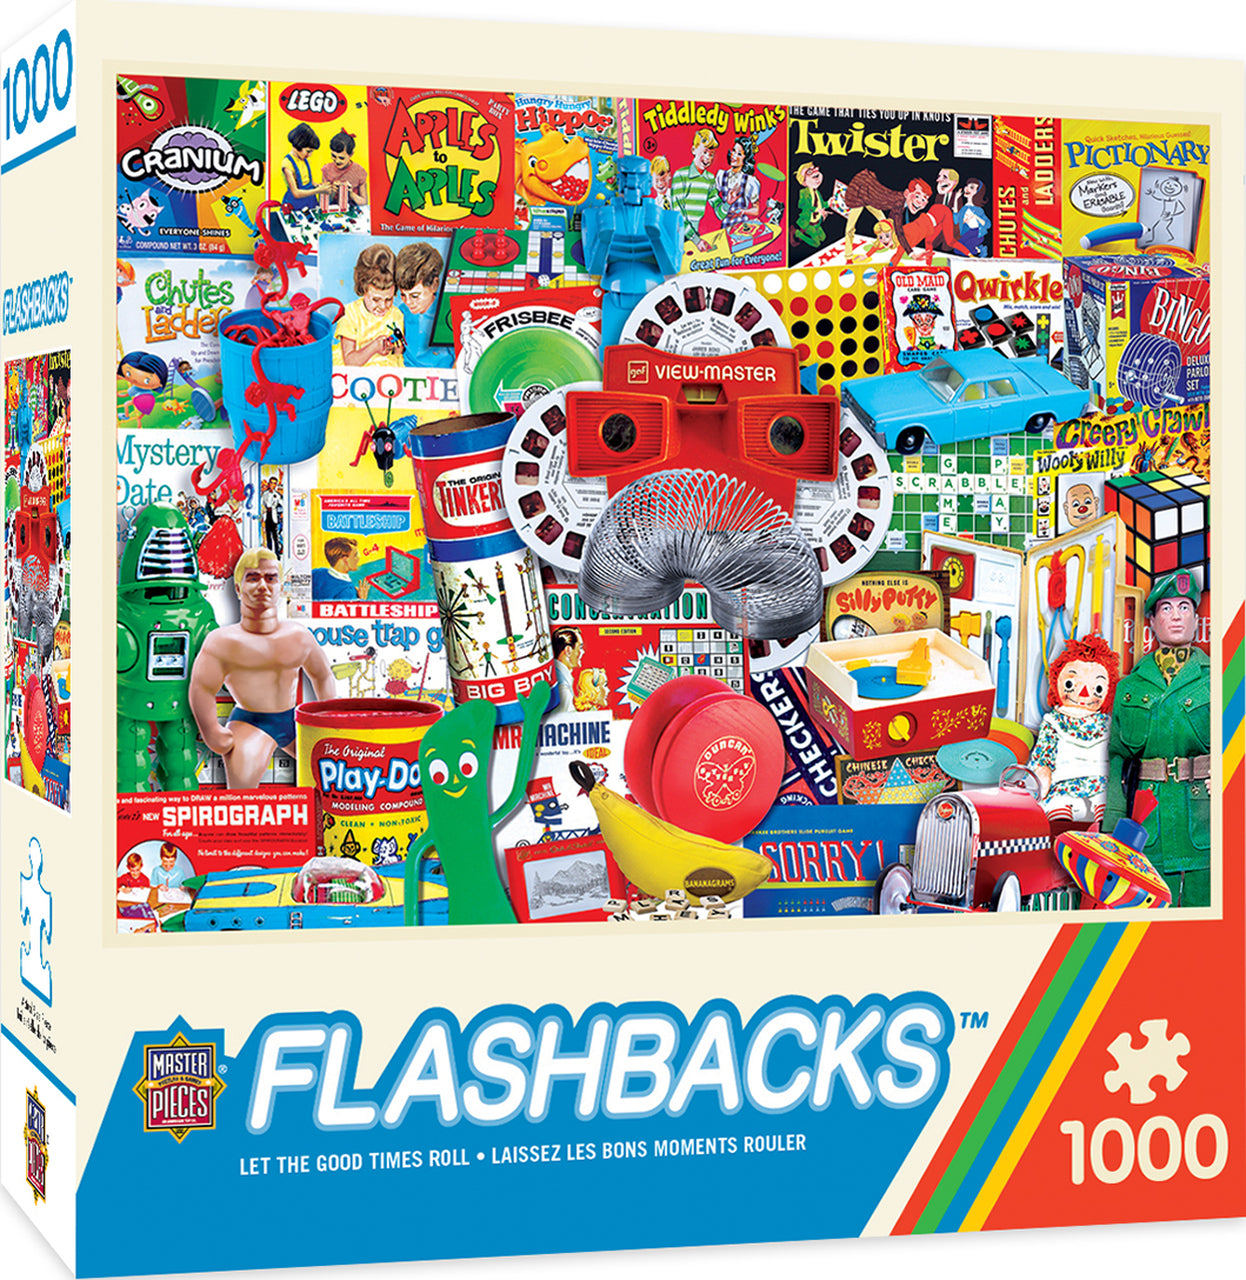 Flashbacks Let the Good Times Roll 1000 Piece Jigsaw Puzzle by Masterpieces